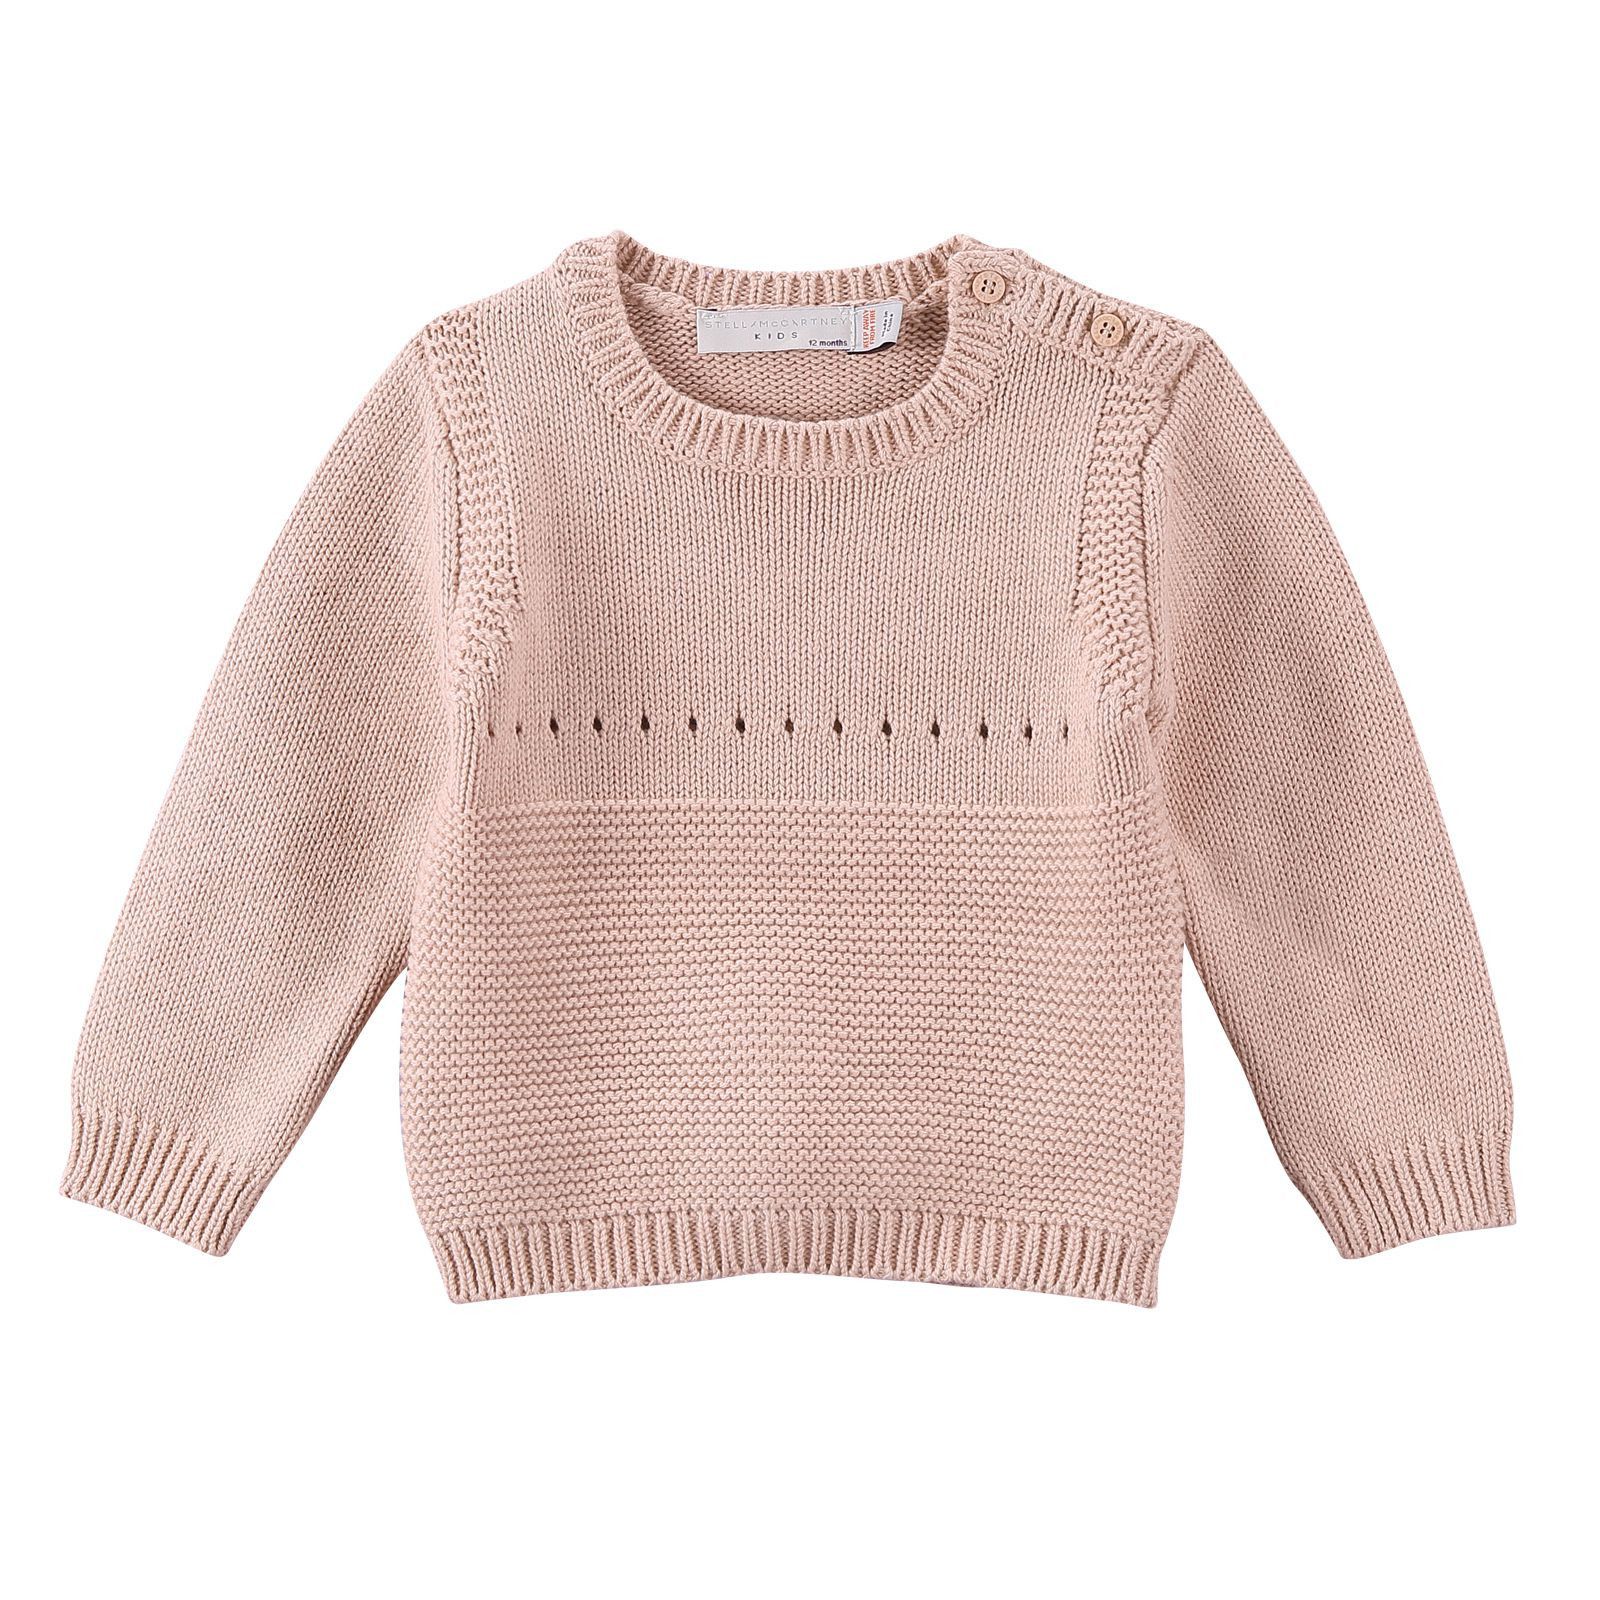 Baby Pink Cotton knitted Bunny Motif Trims Sweater - CÉMAROSE | Children's Fashion Store - 1